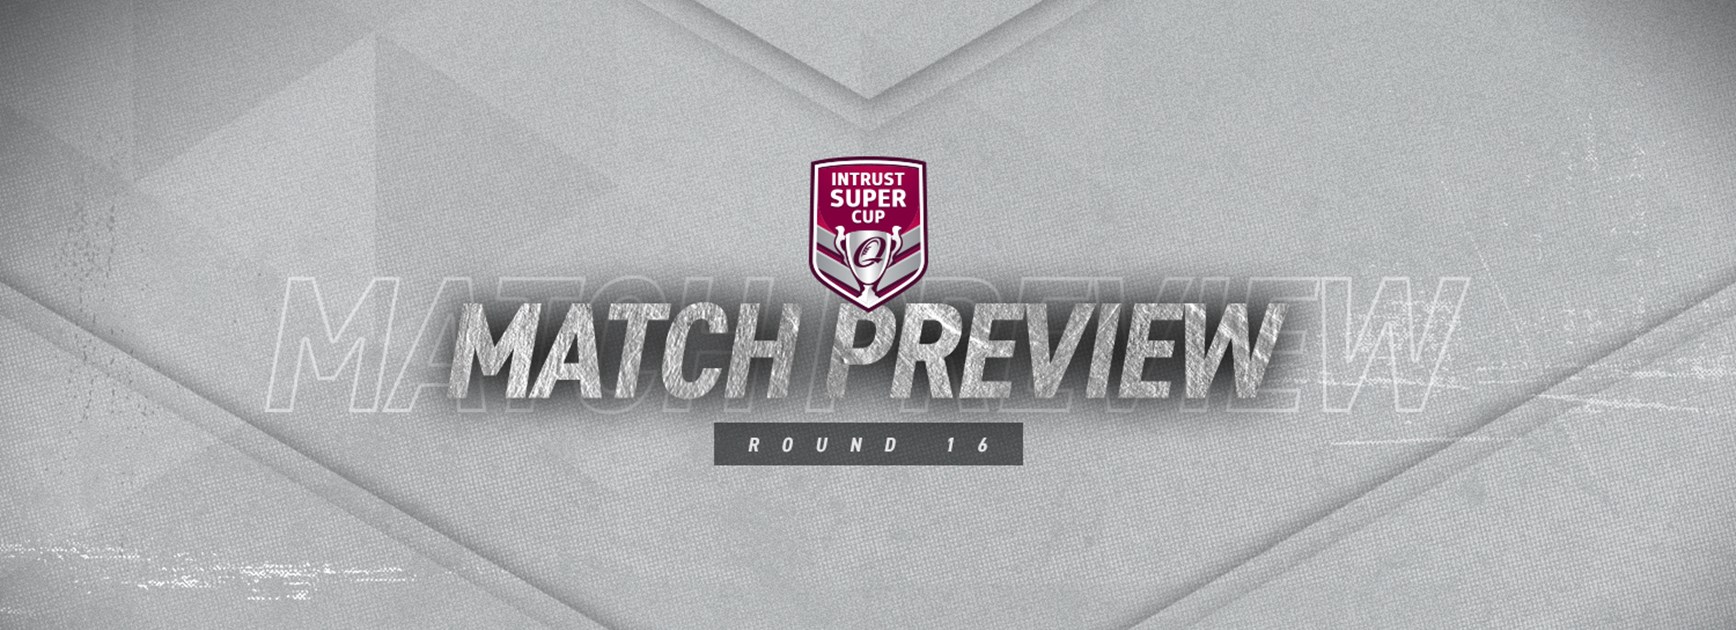 Round 16 Intrust Super Cup preview